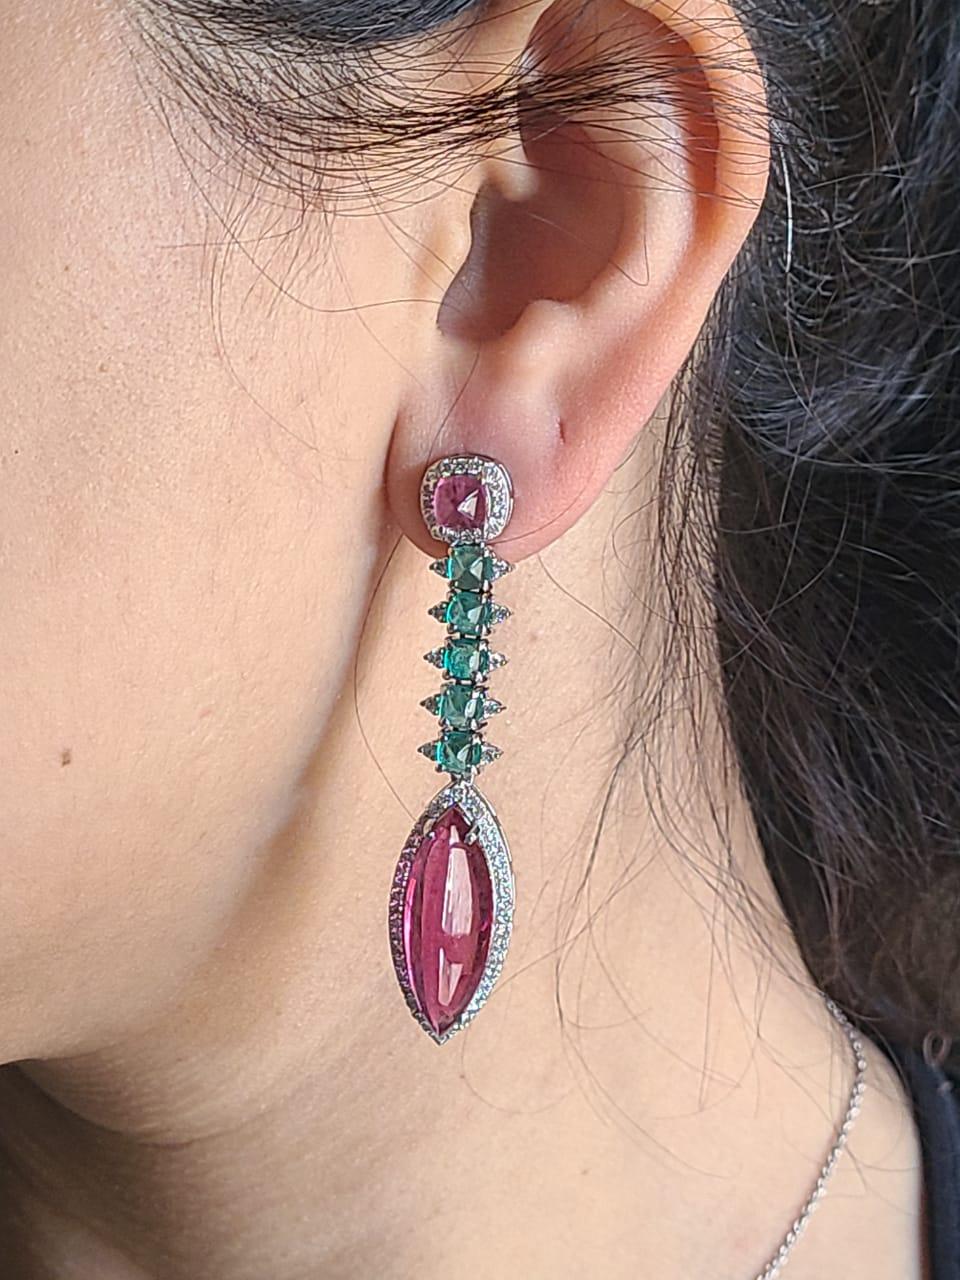 A very gorgeous and one of a kind, Rubellite & Emerald Chandelier Earrings set in 18K Gold & Diamonds. The combined weight of the Rubellite is 19.35 carats. The weight of the Emeralds is 3.36 carats. The Emeralds are completely natural, without any